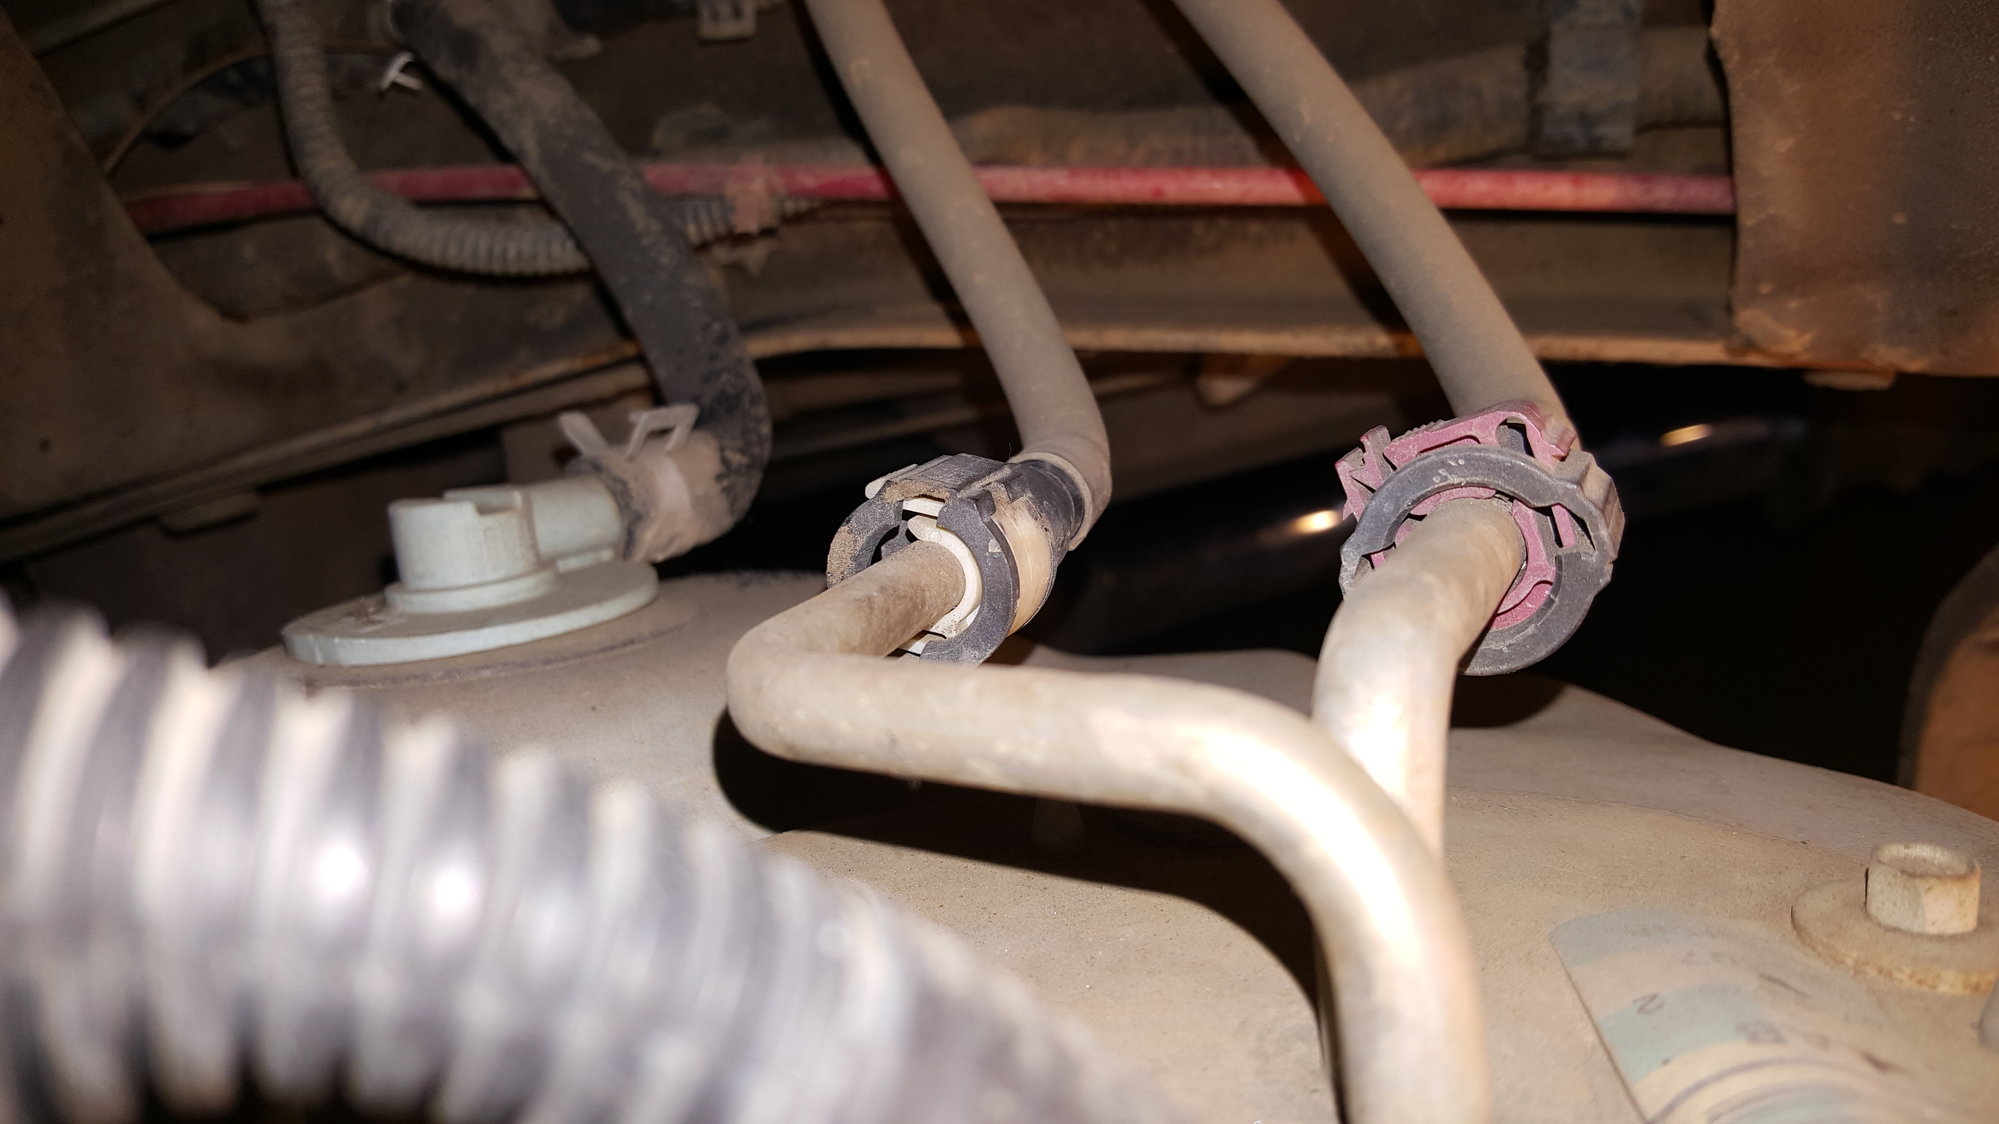 Fuel pump removal - Ford F150 Forum - Community of Ford Truck Fans